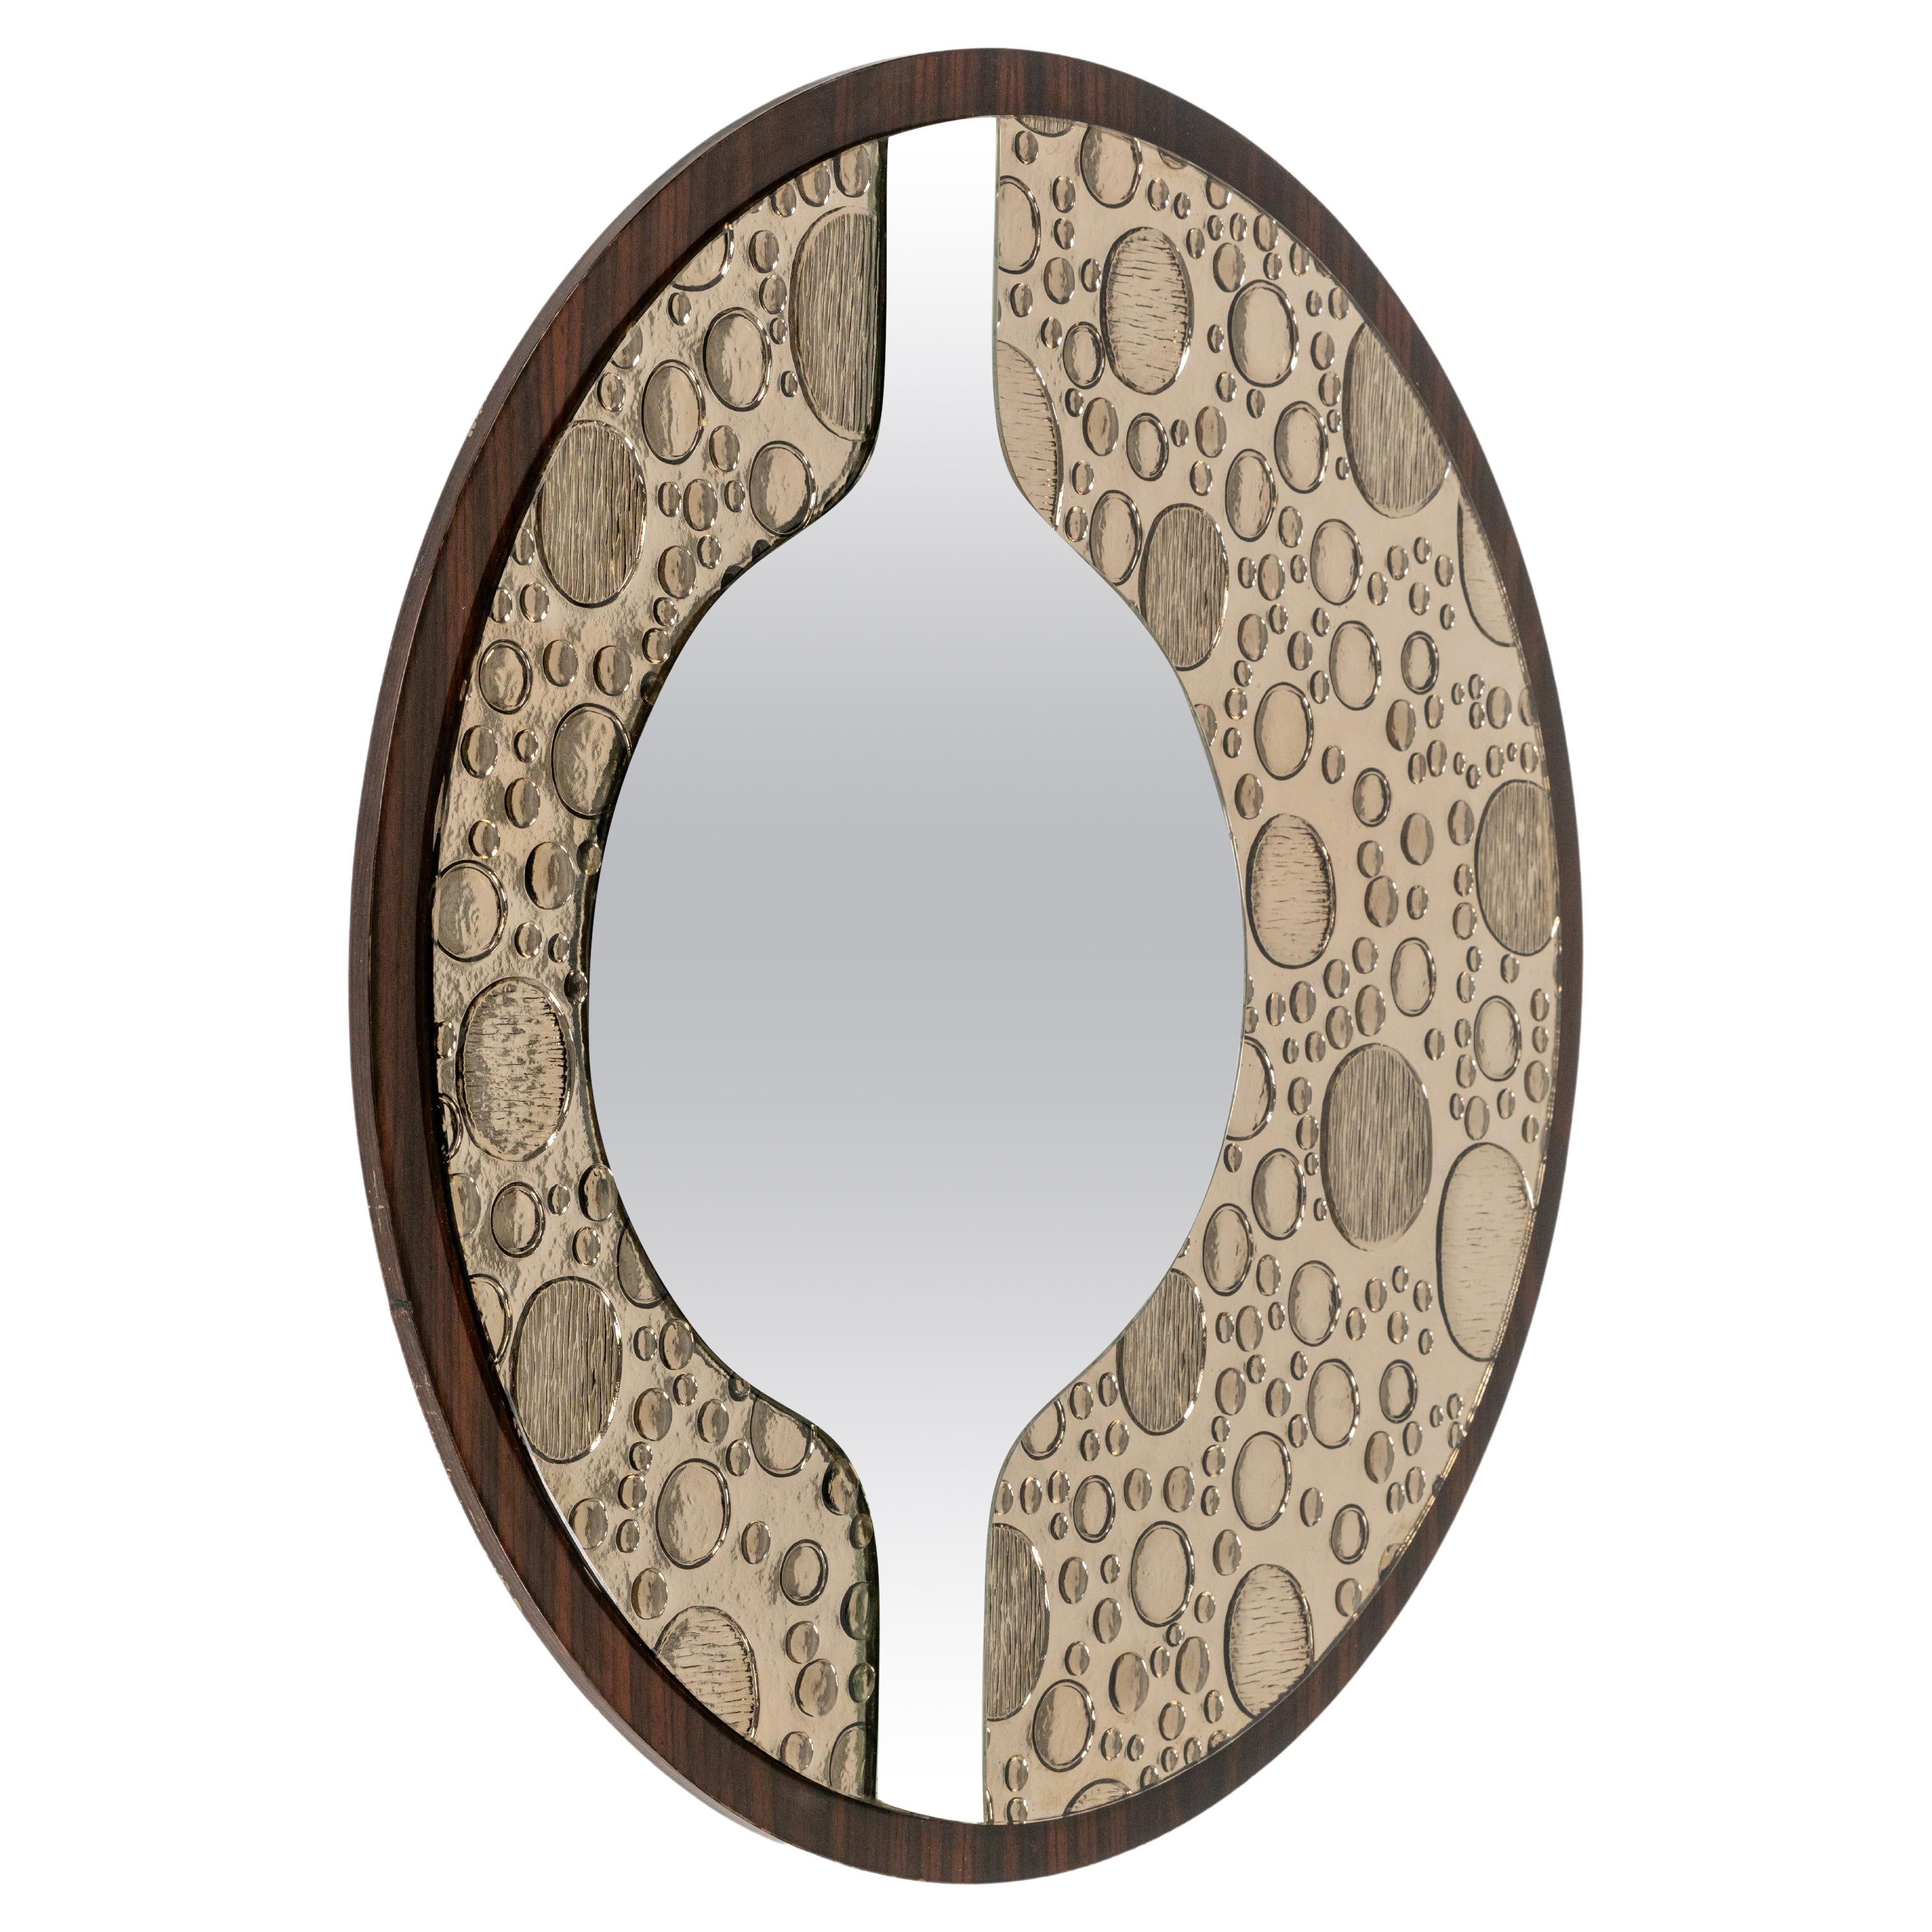 Midcentury Round Wall Mirror in Wood and Glass, Italy 1970s For Sale